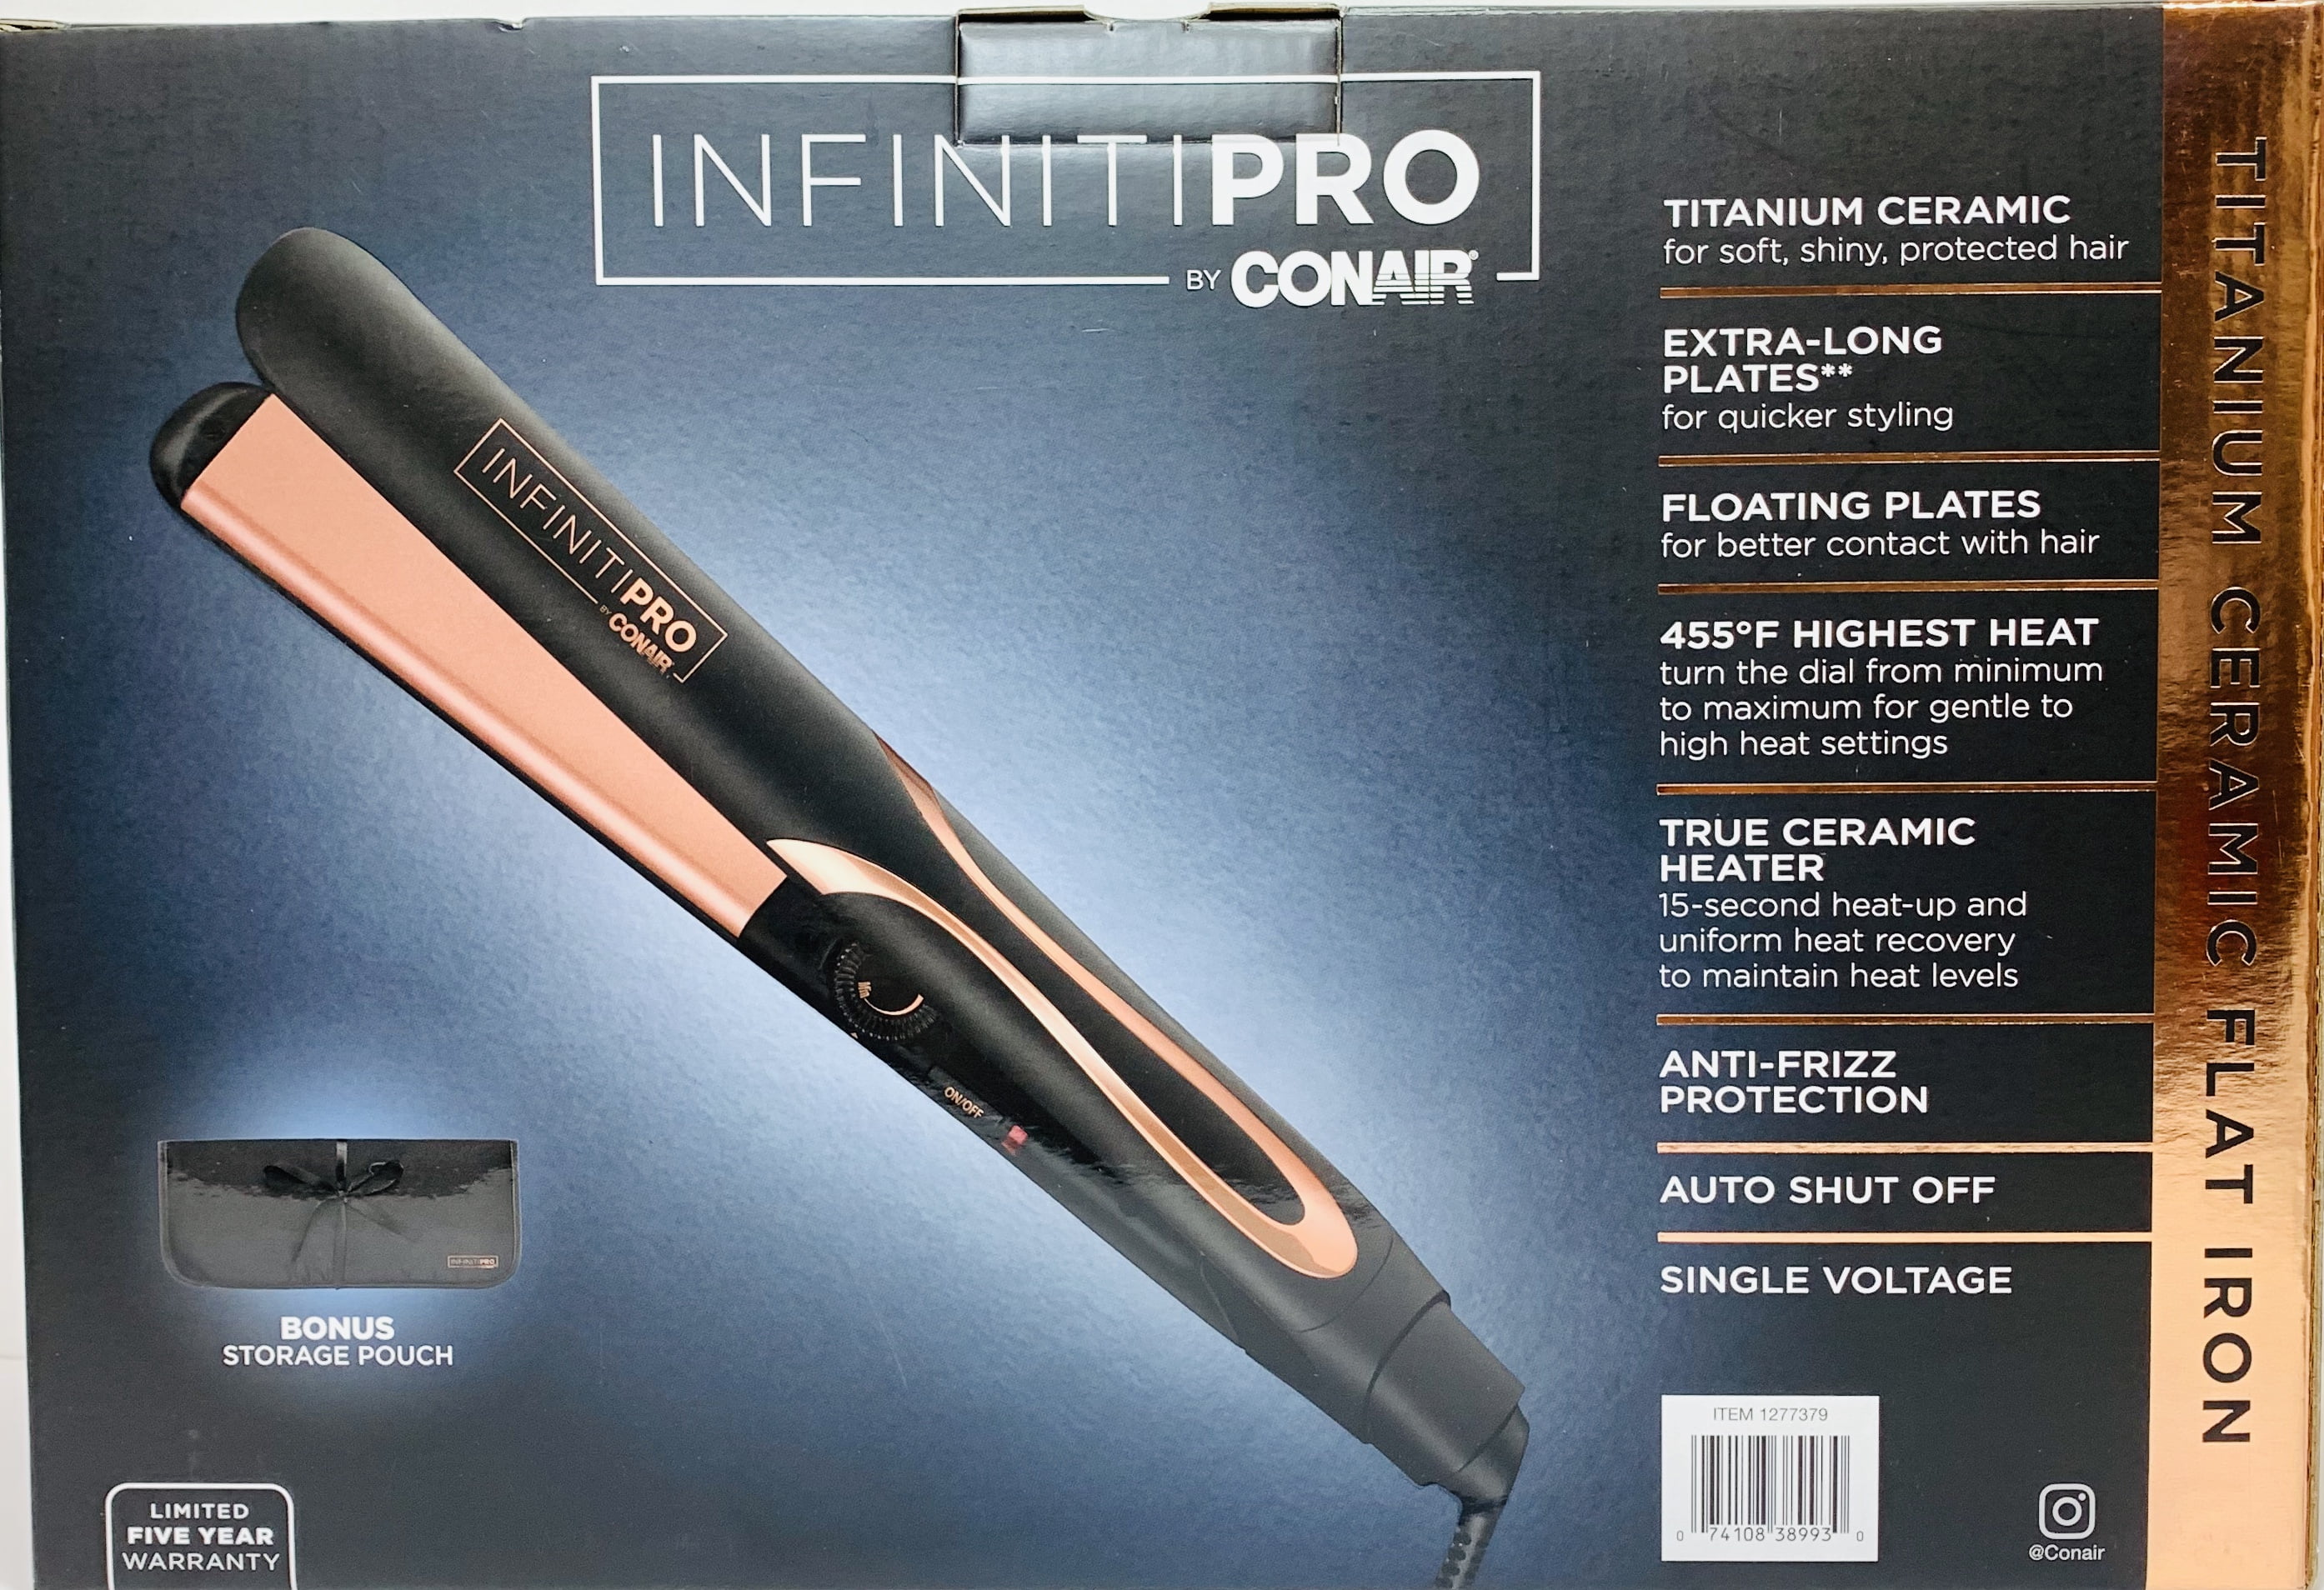 INFINITIPRO BY CONAIR Mini Pro Plus Hair Dryer/Styler with AC Motor, Purple - wide 9